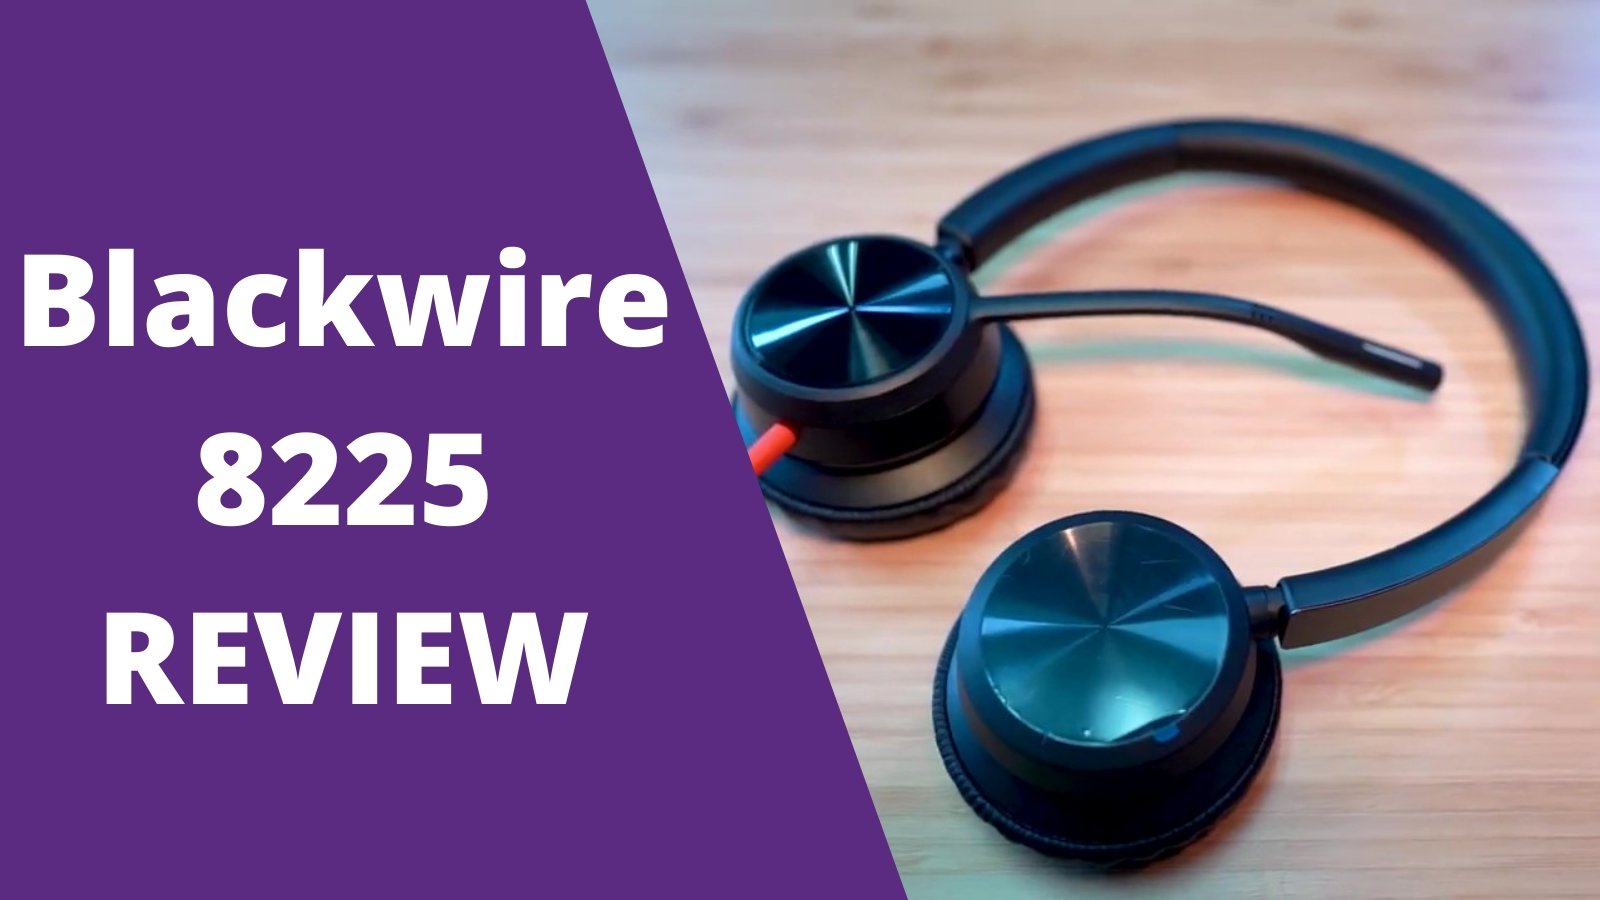 REVIEW & MIC TEST of Poly Blackwire 8225 - Dual Speakers with ANC! - Headset Advisor